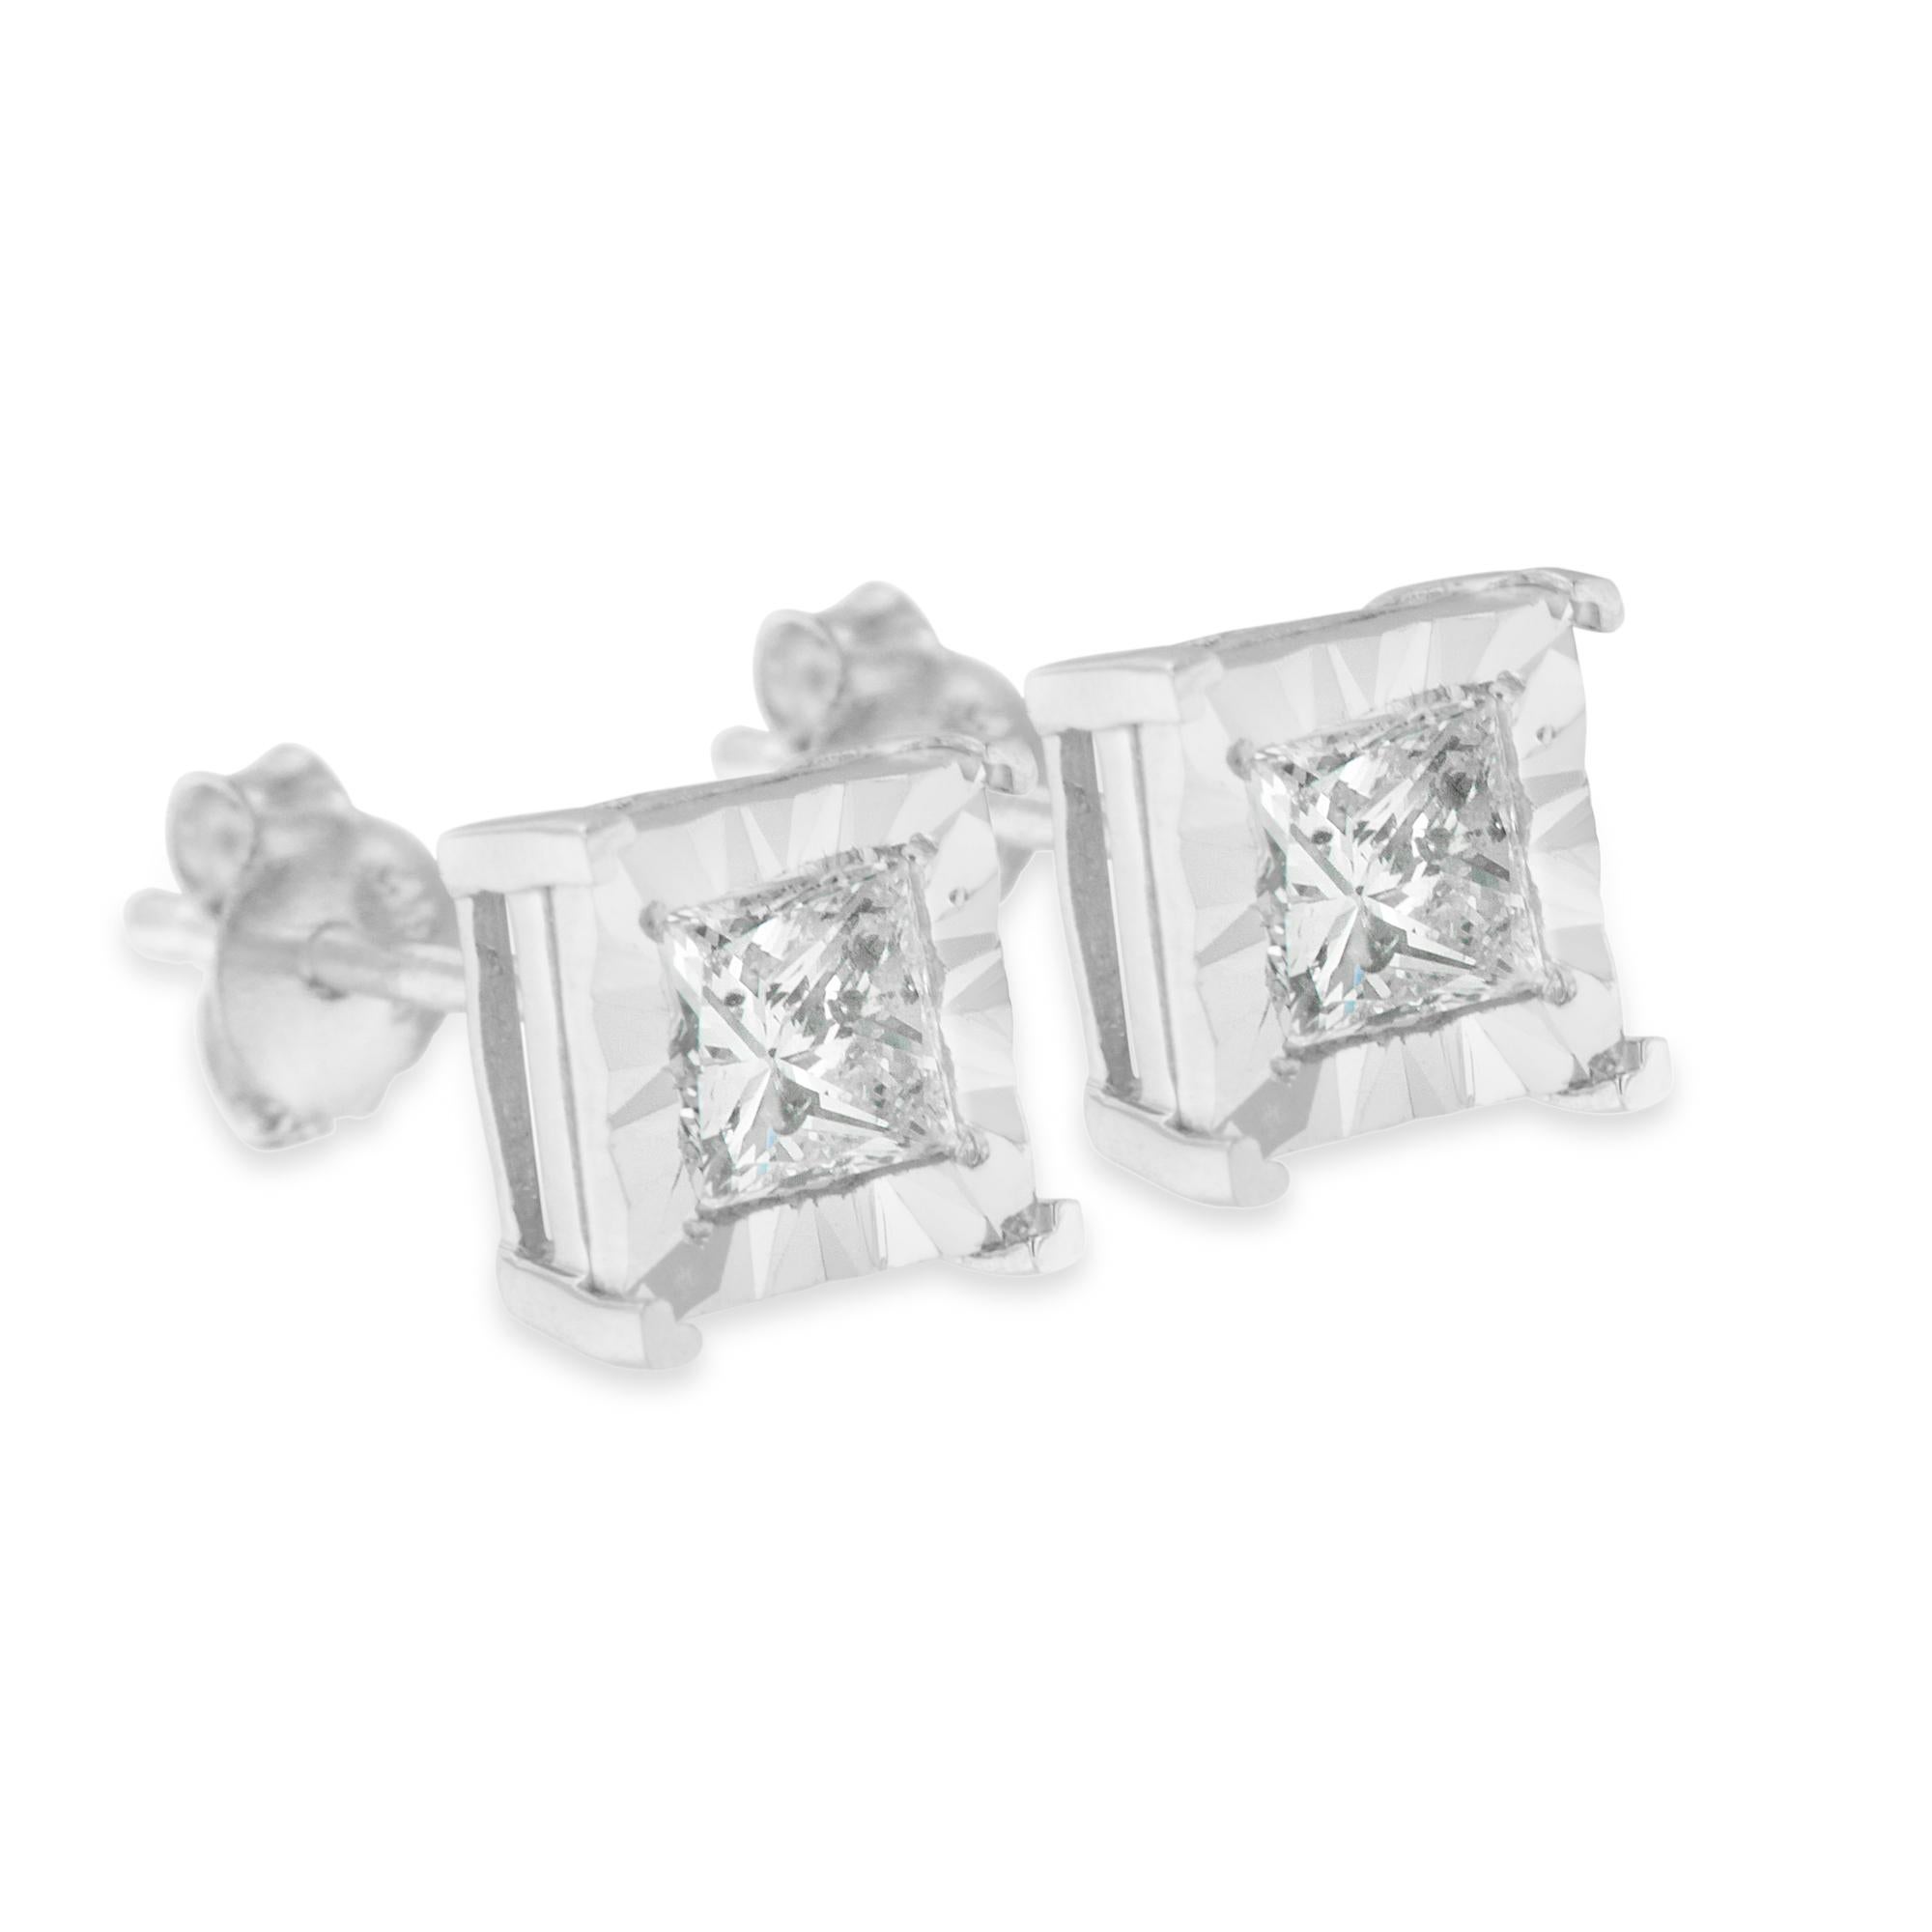 .925 Sterling Silver 1.0 Carat Miracle Set Diamond Solitaire Stud Earrings In New Condition For Sale In New York, NY